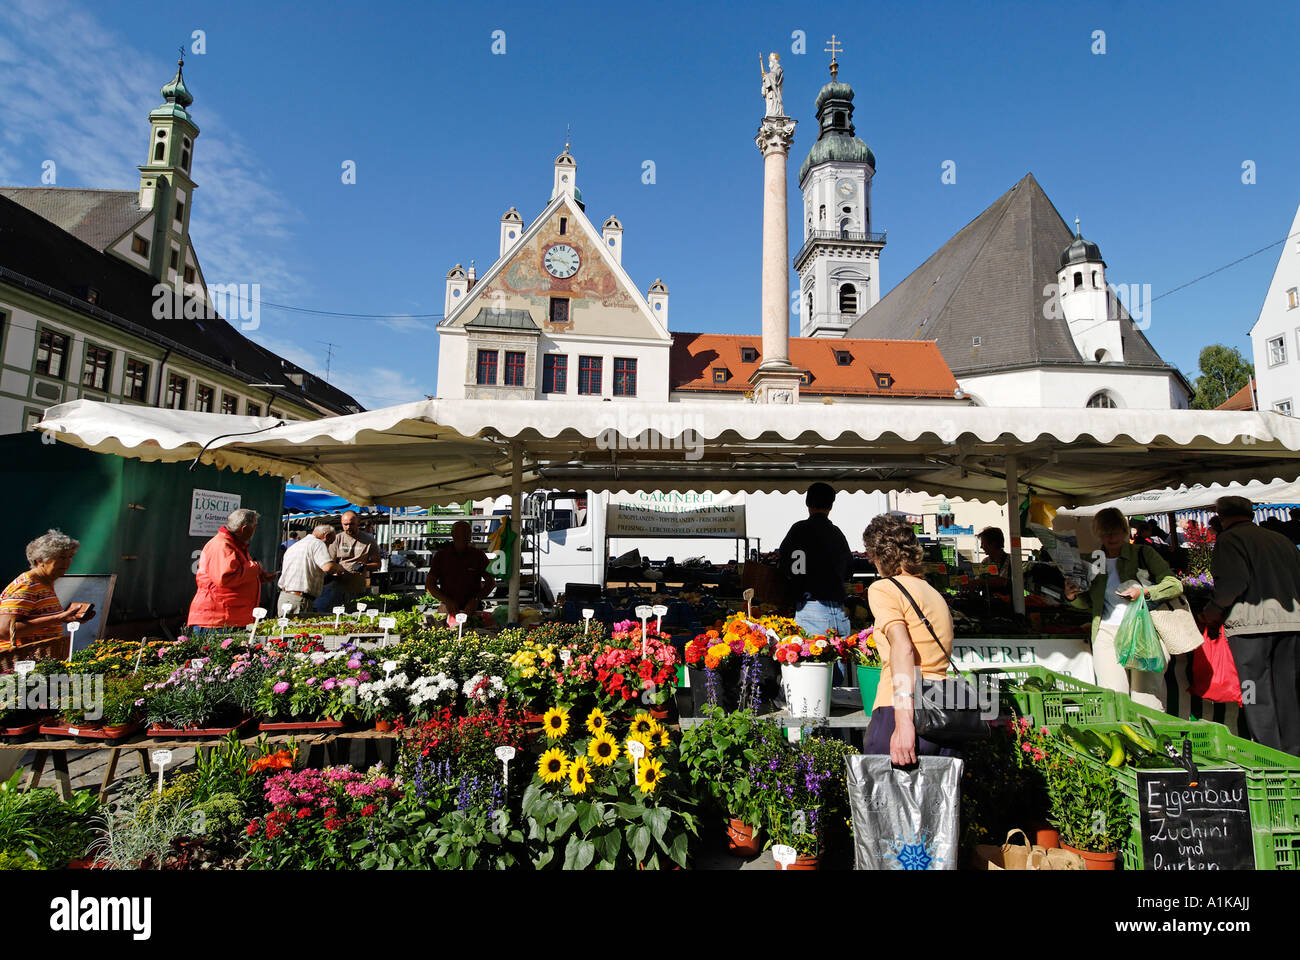 Page 17 - Freising Germany High Resolution Stock Photography and Images -  Alamy